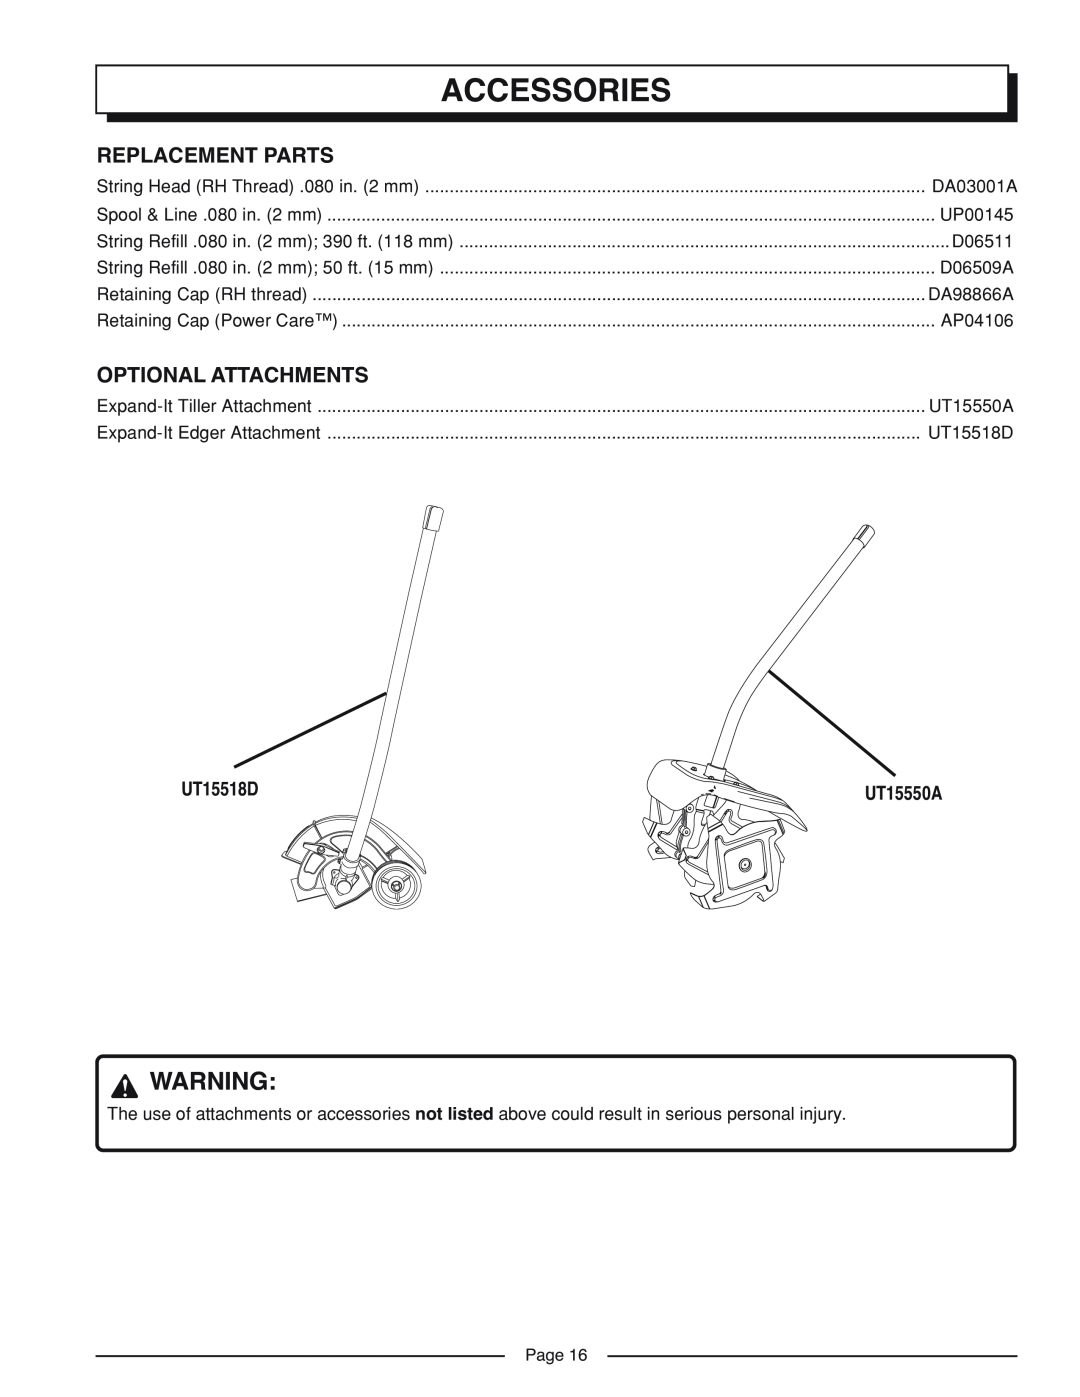 Homelite UT41002A manual Accessories, Replacement Parts, Optional Attachments, UT15518D, Page, UT15550A 